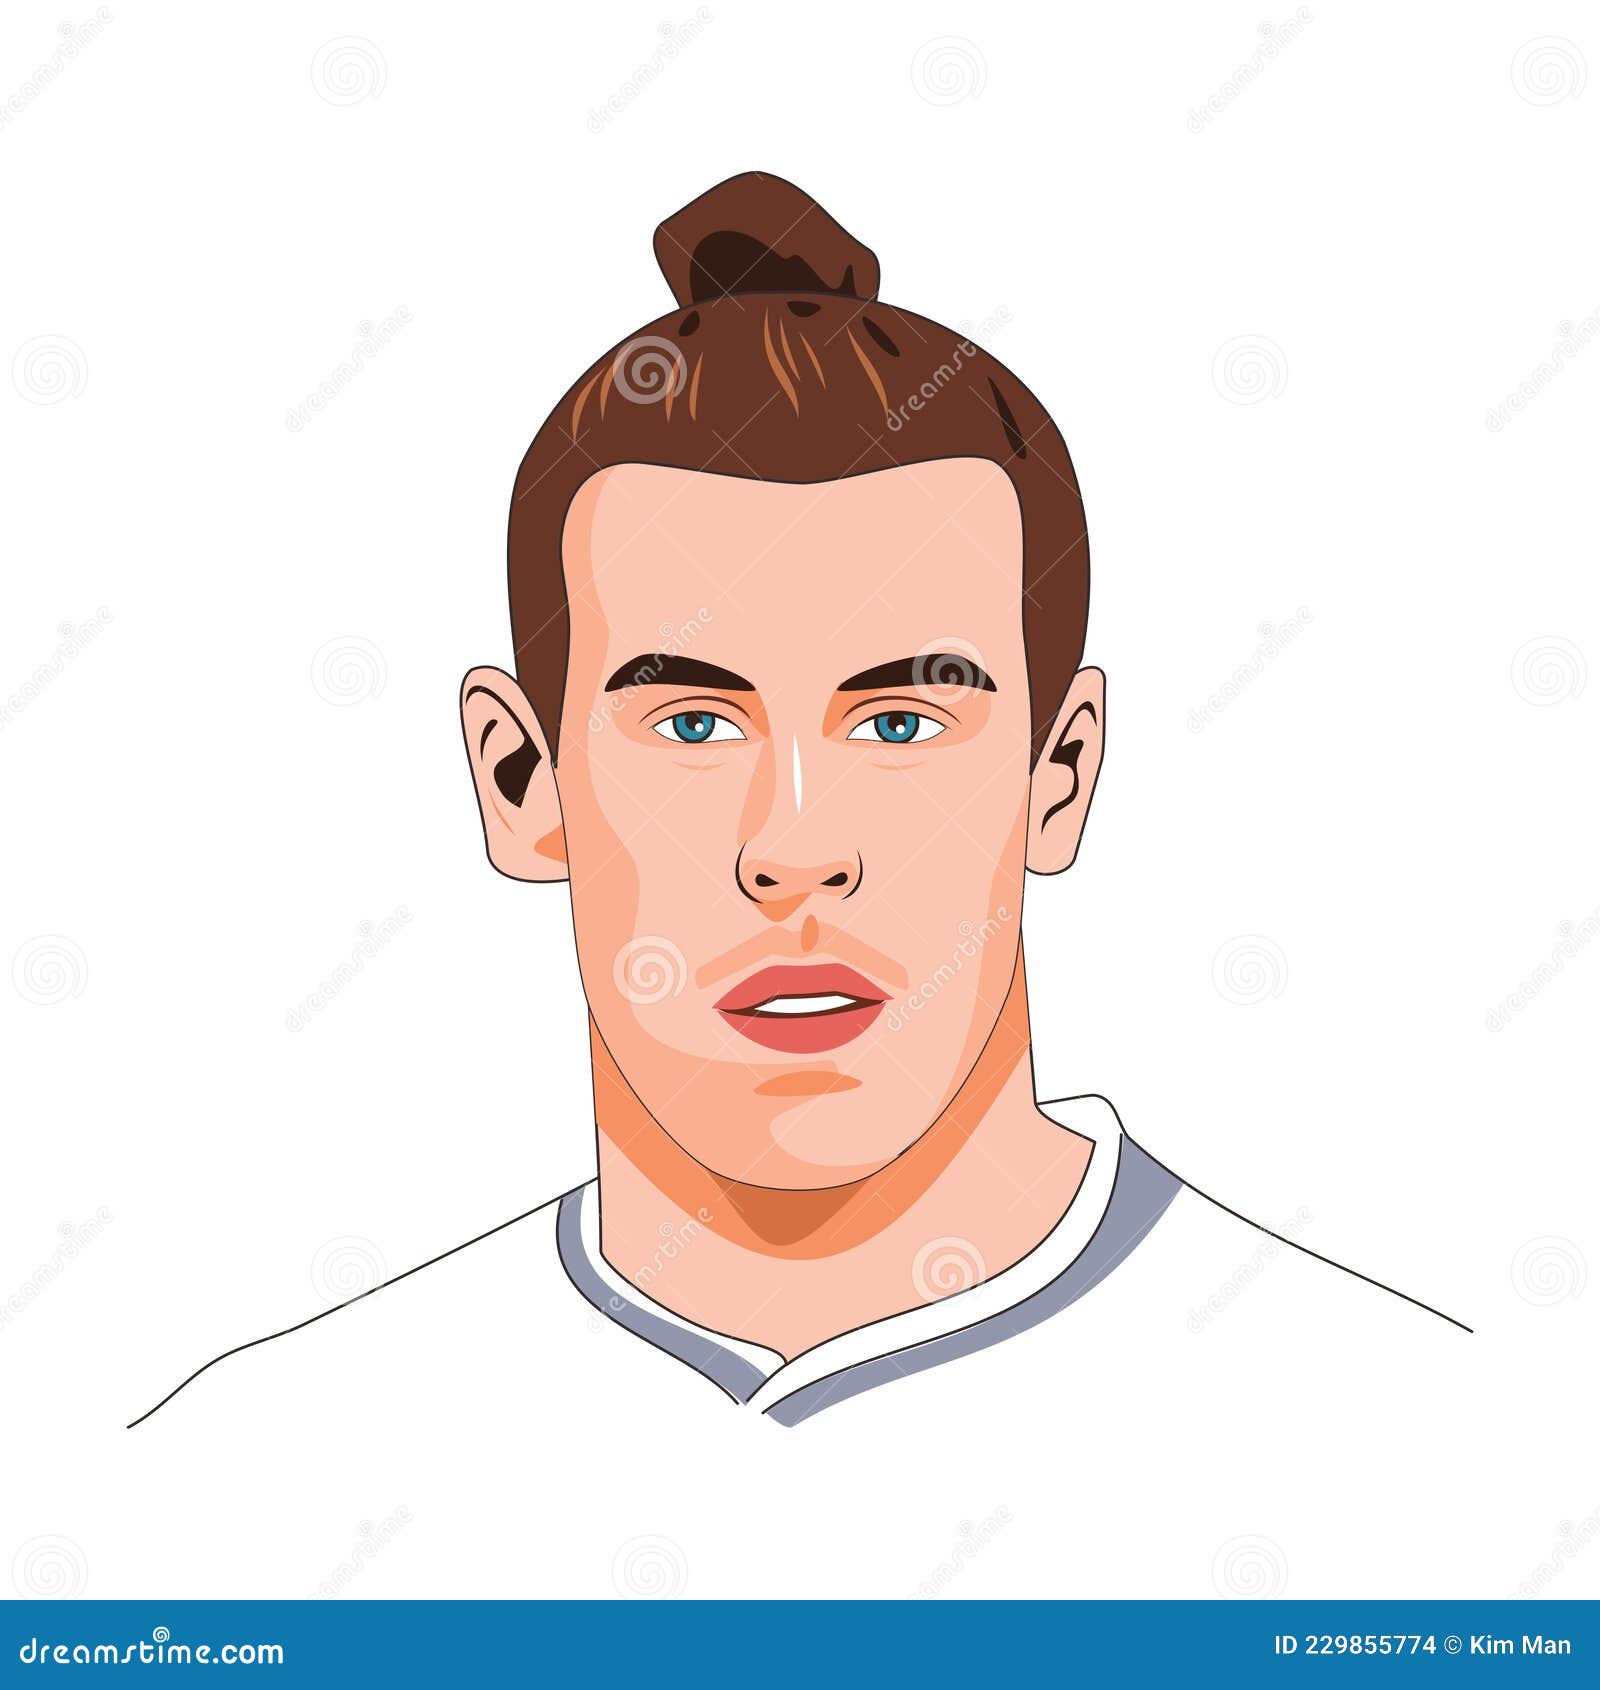 Gareth Bale Sketch Illustration, Isolated Style Editorial Stock Image ...